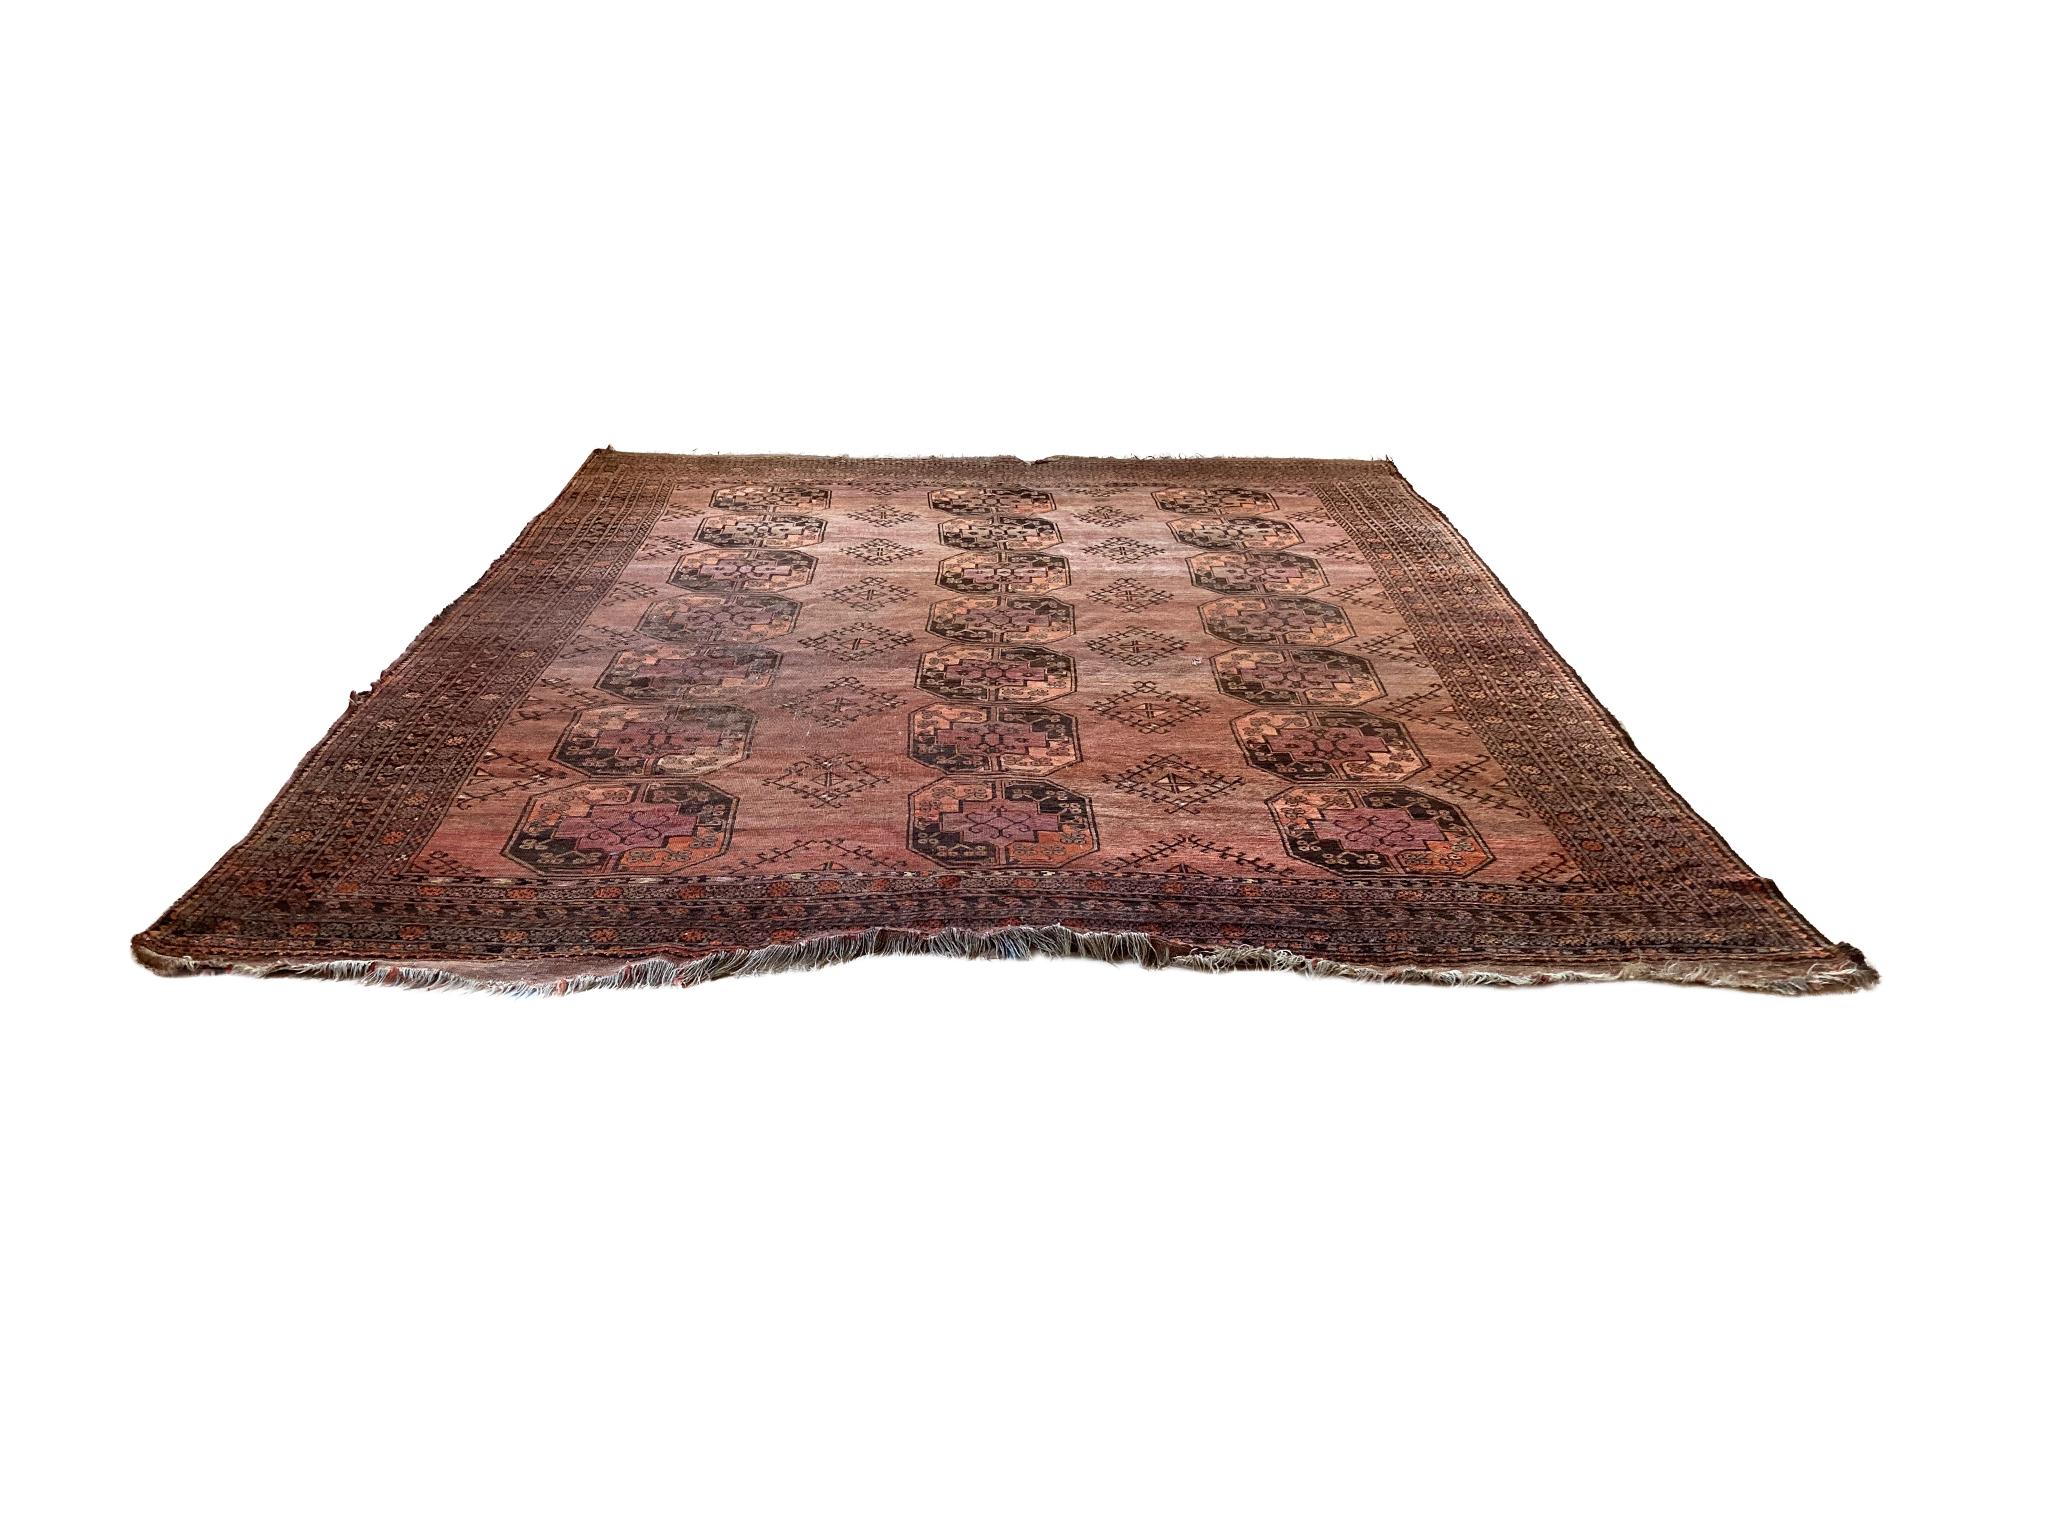 Large Afghan Bokhara rug, hand-woven in the 1940s. It features the traditional guls arranged in a row on a rust-red field, surrounded by bands with geometric floral patterns.

Dimensions:
12' 2